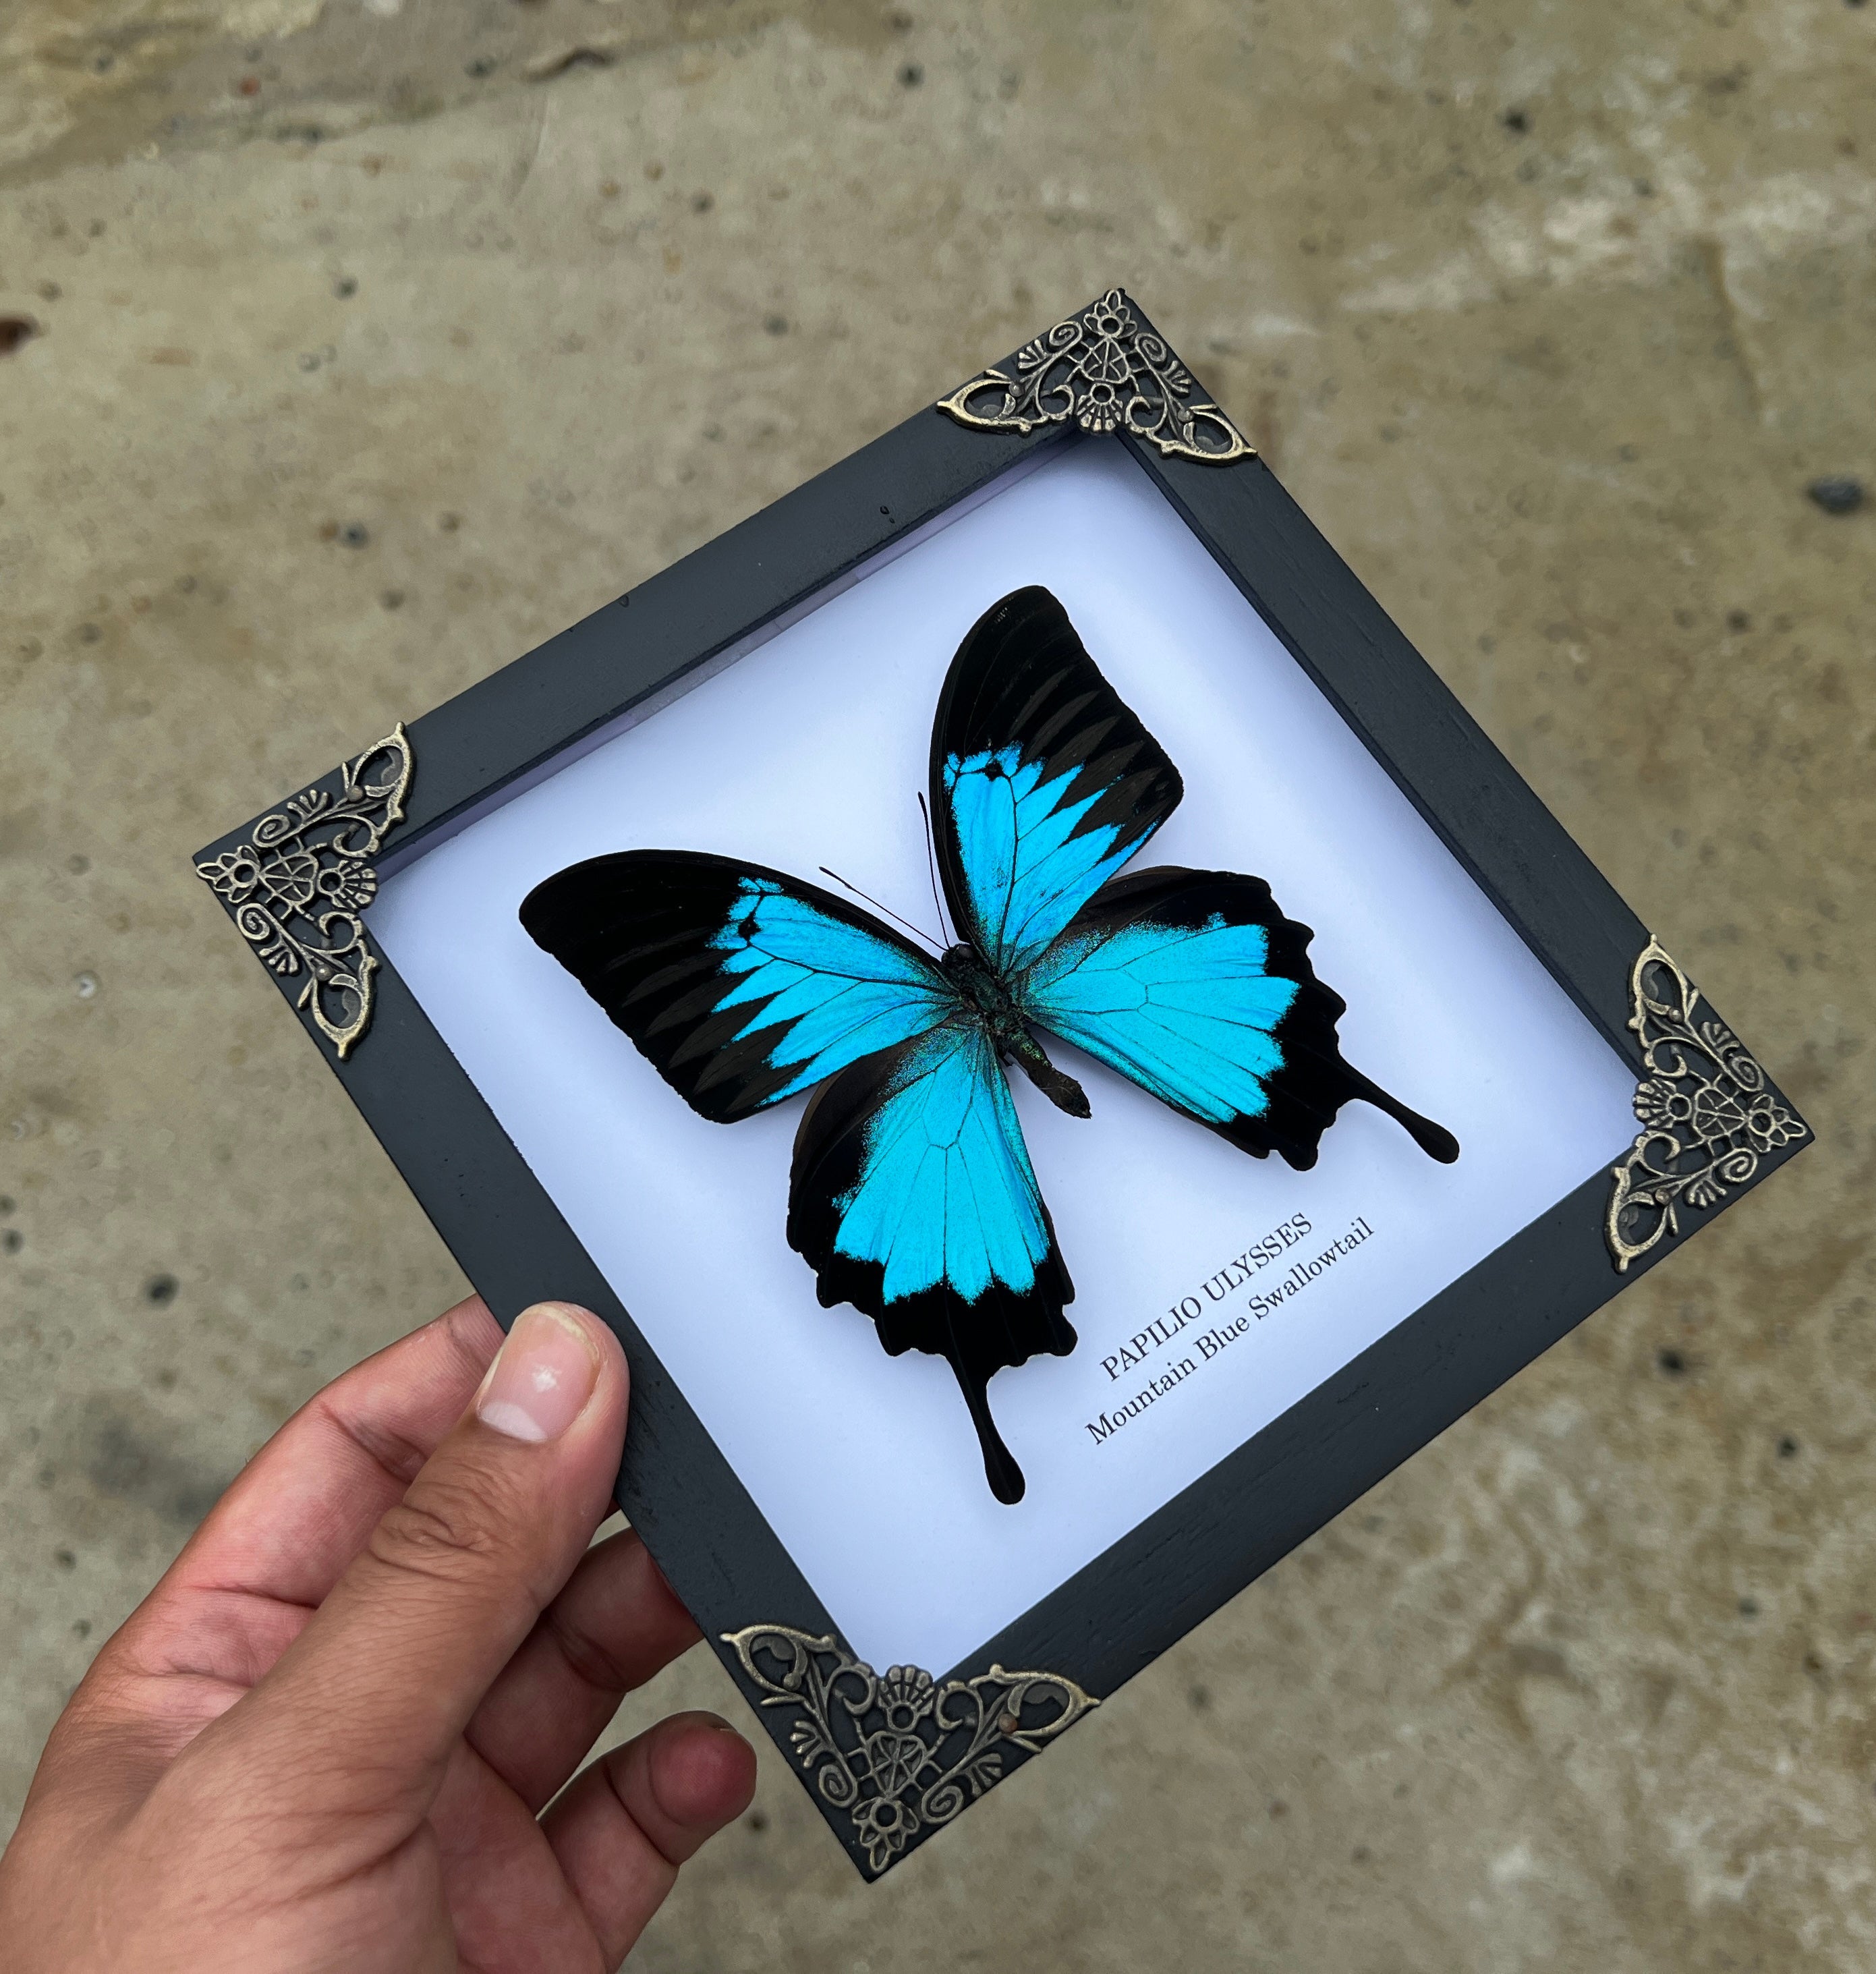 Vinatimes Real Framed Blue Swallowtail Butterfly Handmade Wooden Frame Shadow Box Dried Insect Bug Dead Lover Taxidermy Specimen Display Tabletop Wall Art Hanging Artwork Home Decor Reading Gallery K16-28-TR - Vinacreations